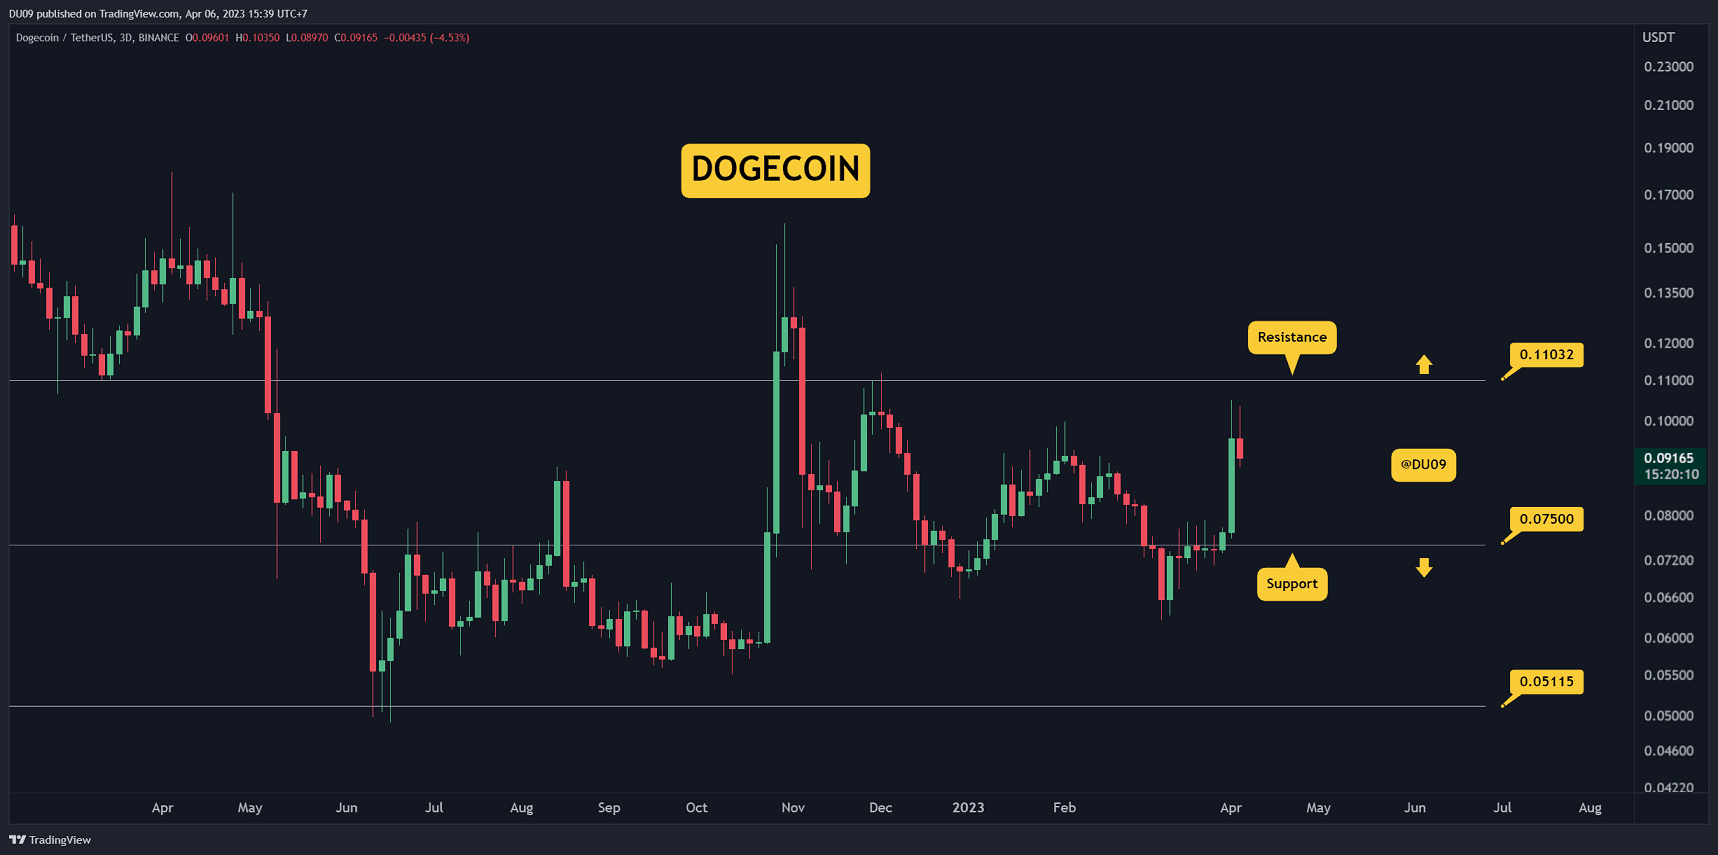 Doge-cools-off-following-twitter-hype,-tumbles-9%-daily?-(dogecoin-price-analysis)